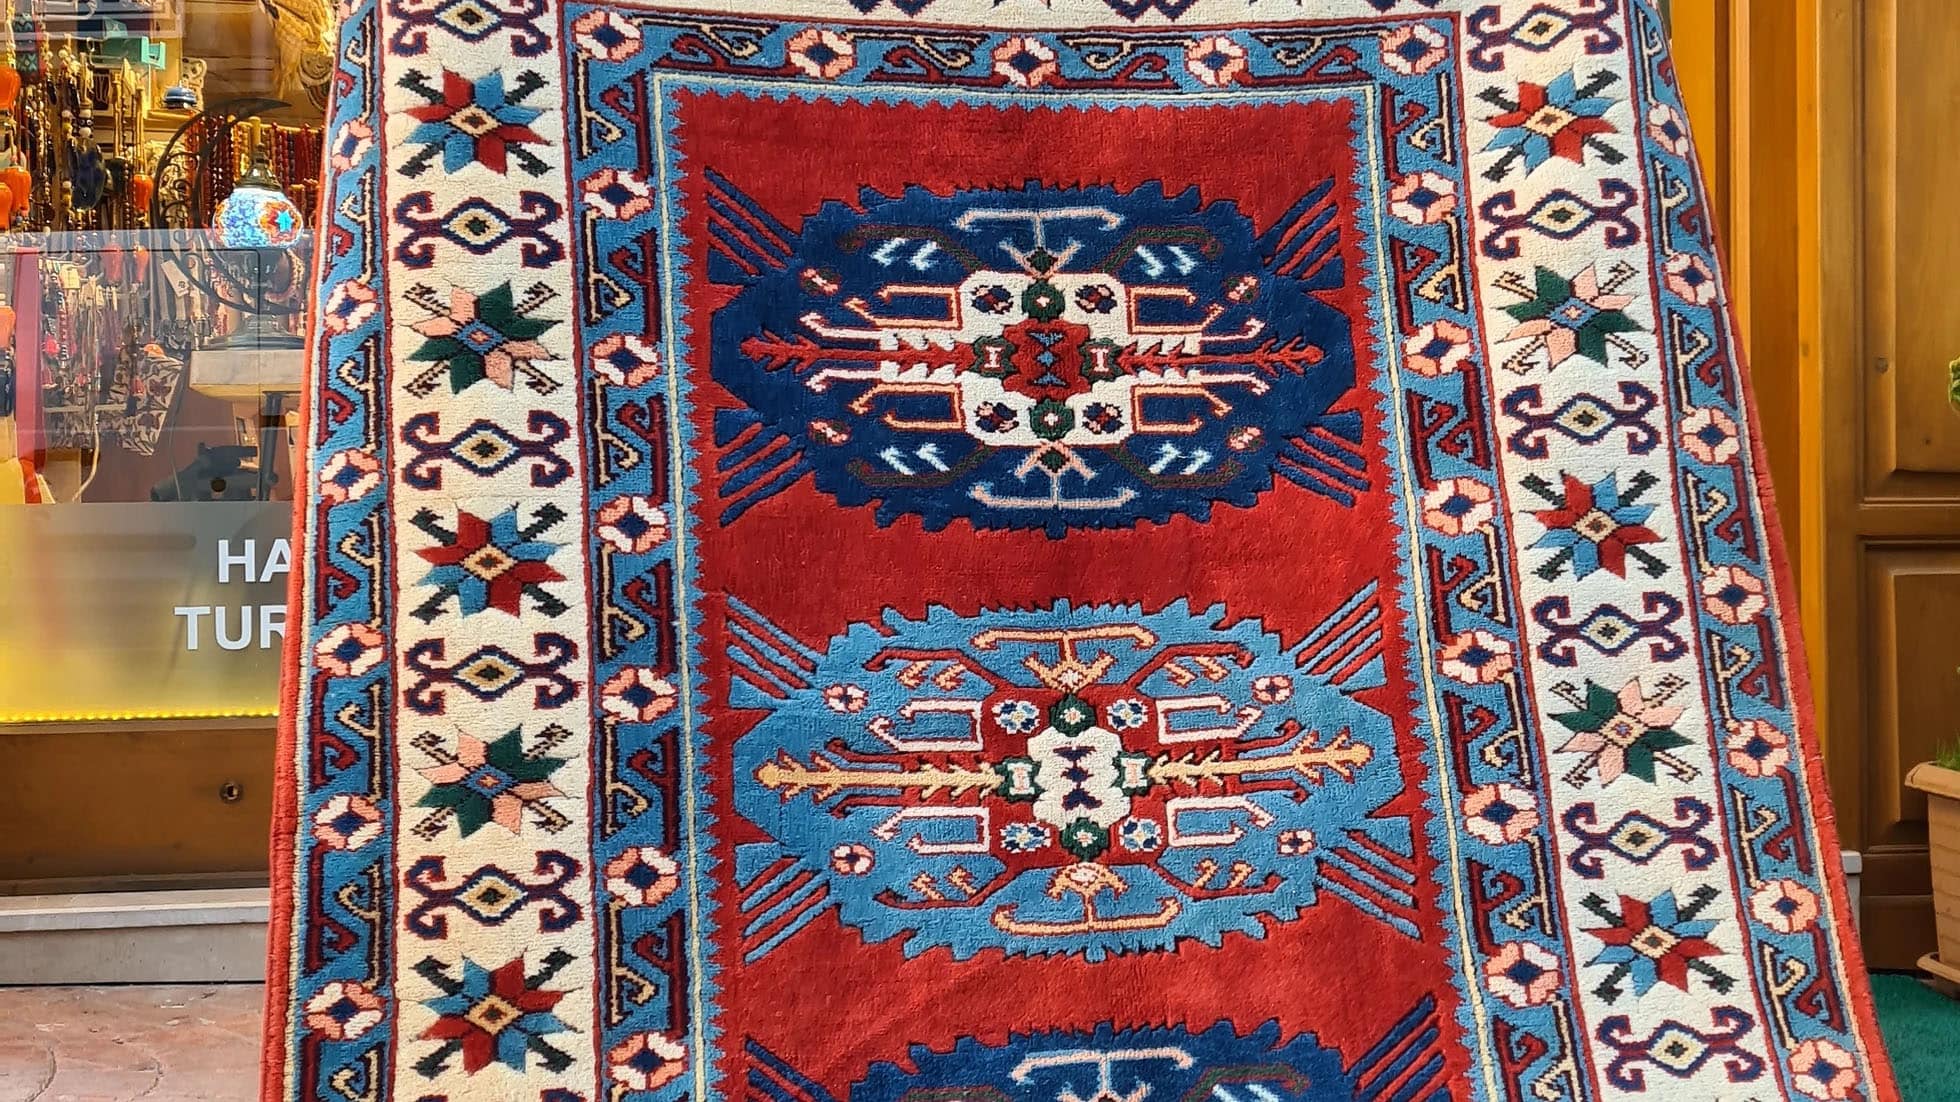 Vintage Turkish Handwoven Rare Pergamon Oriental Carpet with Medallions and Floral Patterns in Red, Blue